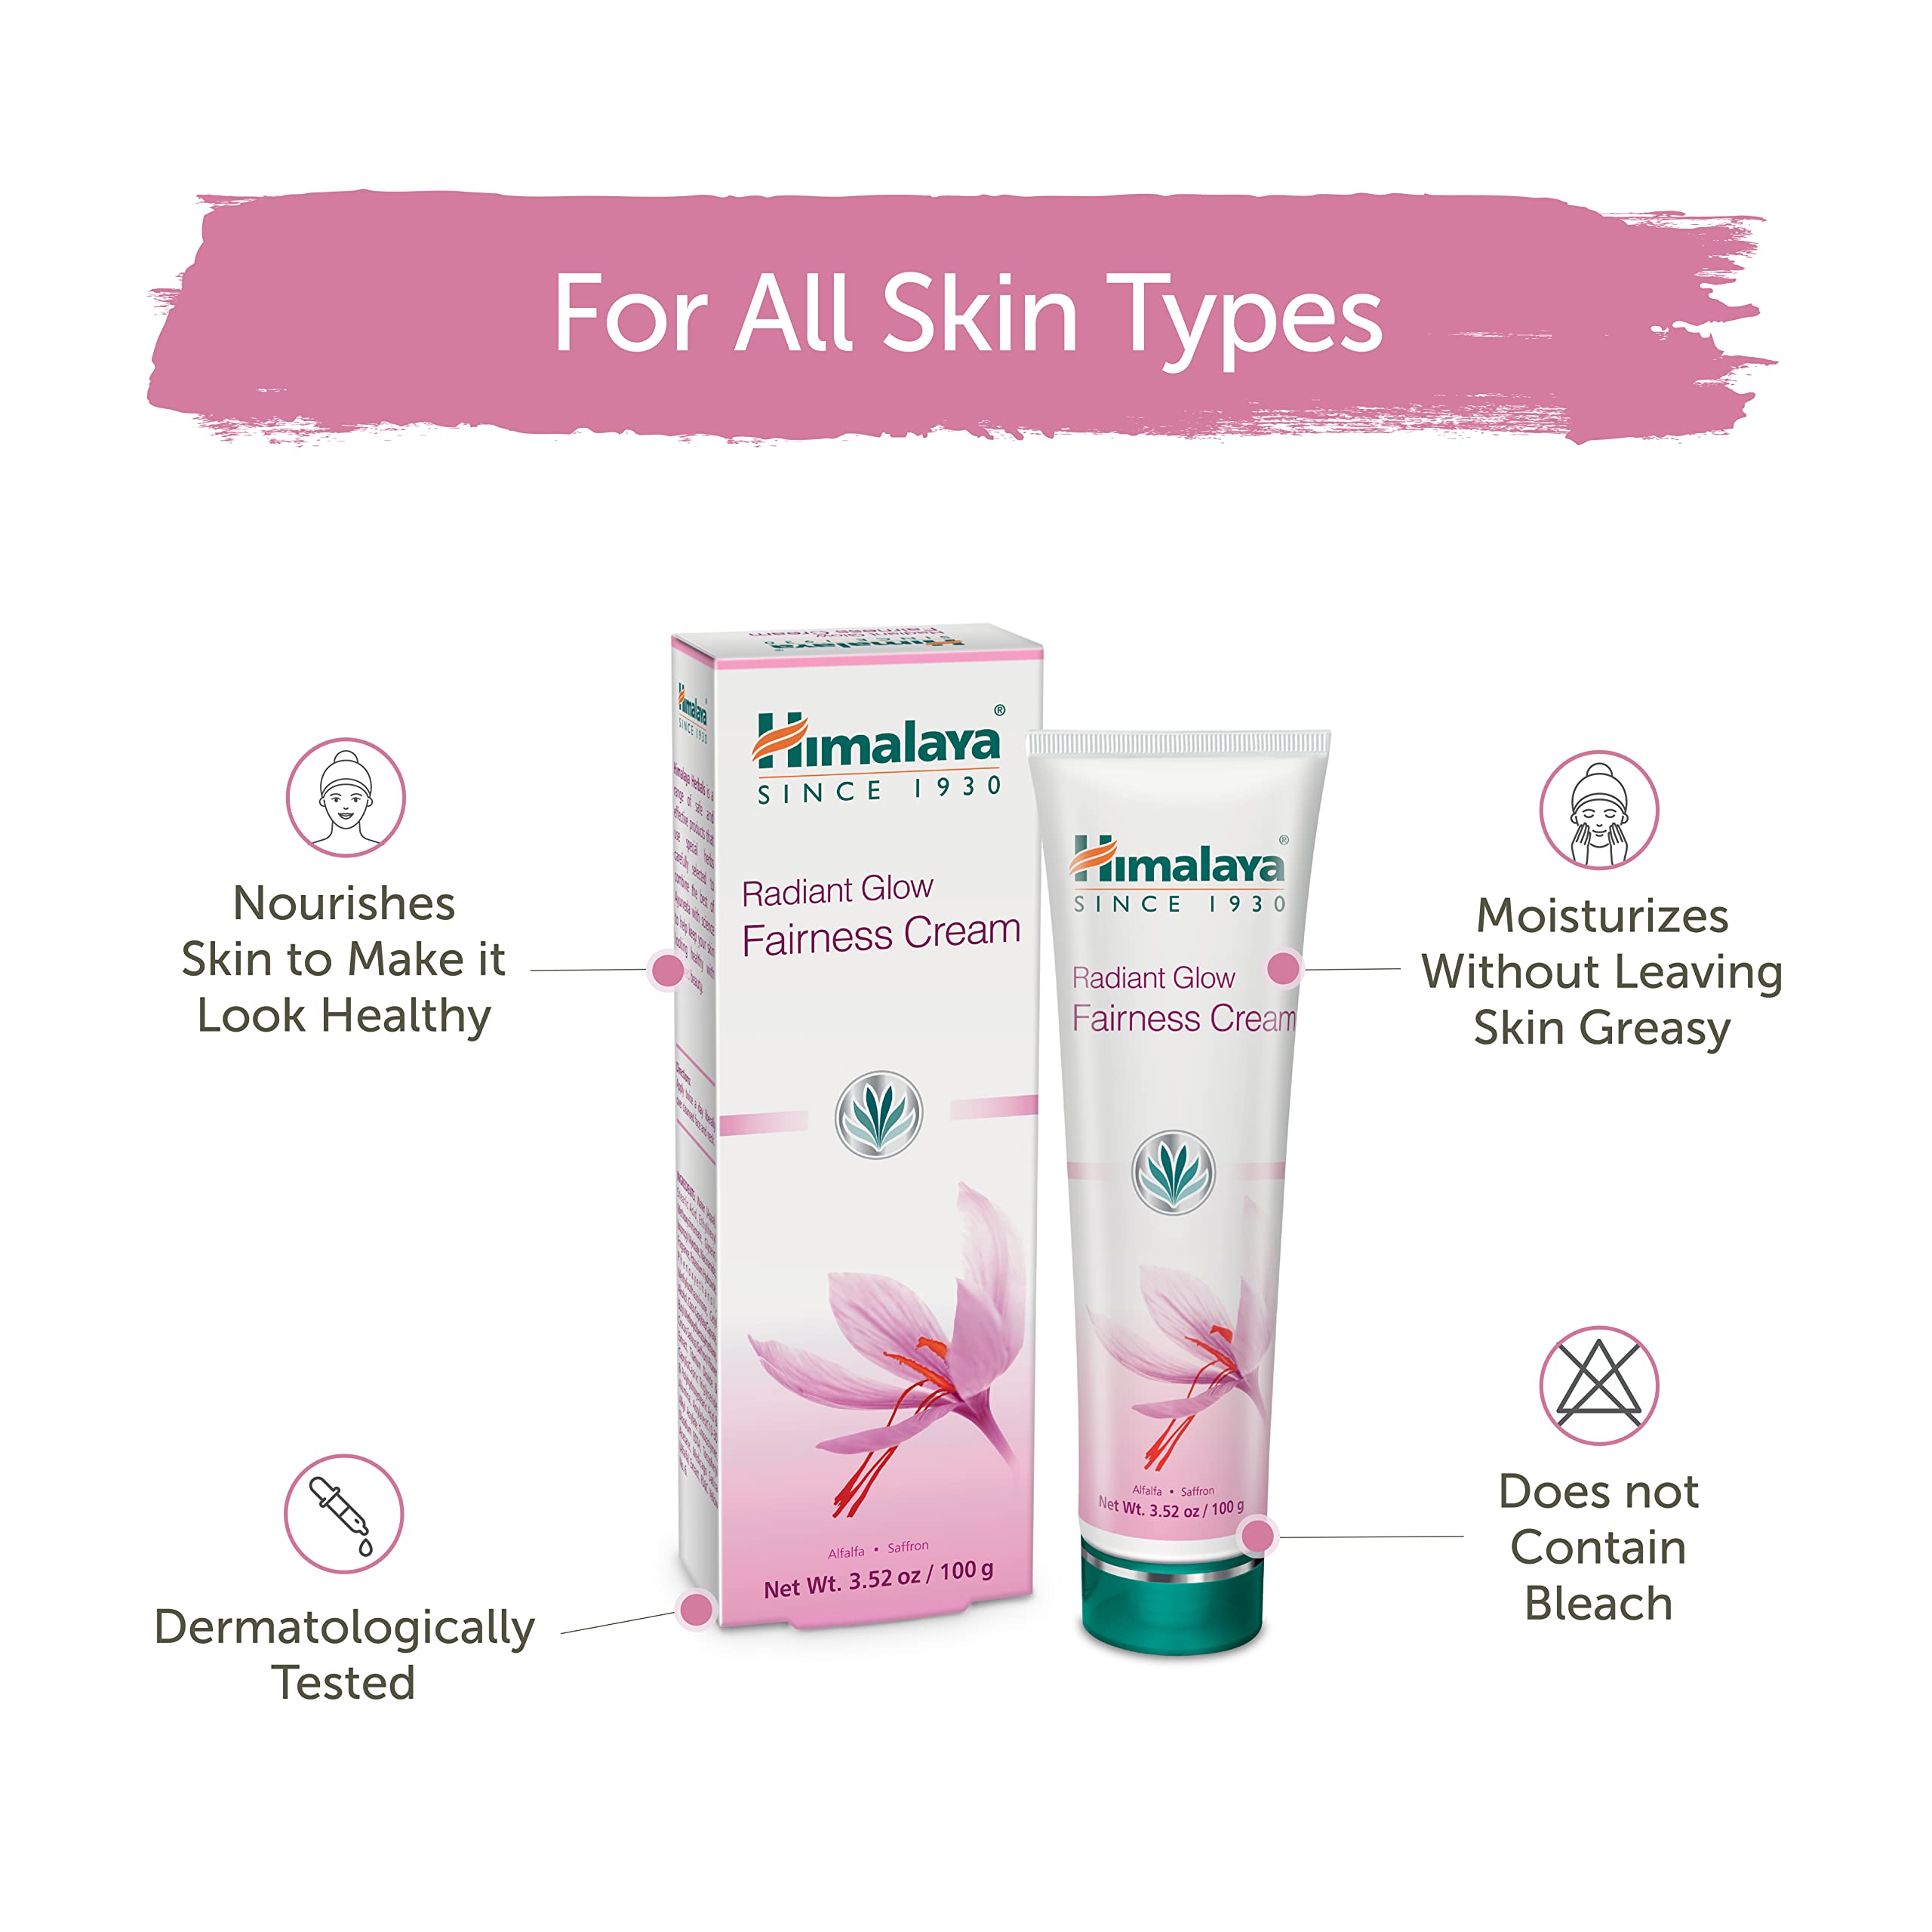 Himalaya Radiant Glow Fairness Cream for Dark Spots, Eye Bags and Under Eye Circles, Free from Parabens and Bleach, Moisturizing and Brightening Cream with Saffron and Alfalfa, 3.52 oz (100 g)